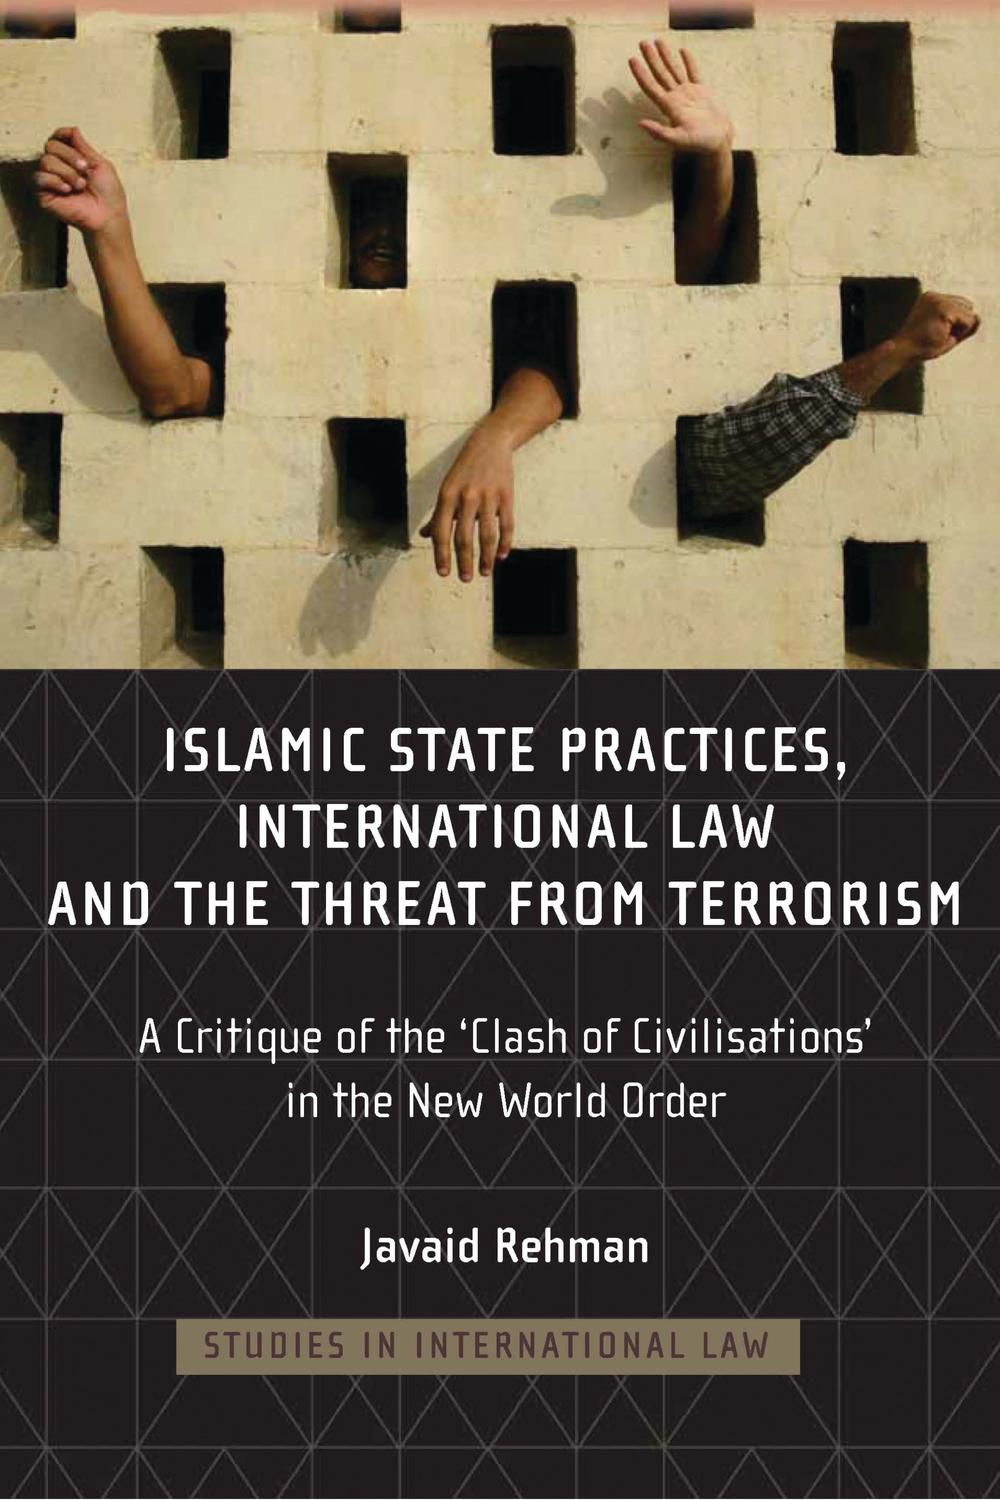 Islamic State Practices, International Law and the Threat from Terrorism - Javaid Rehman